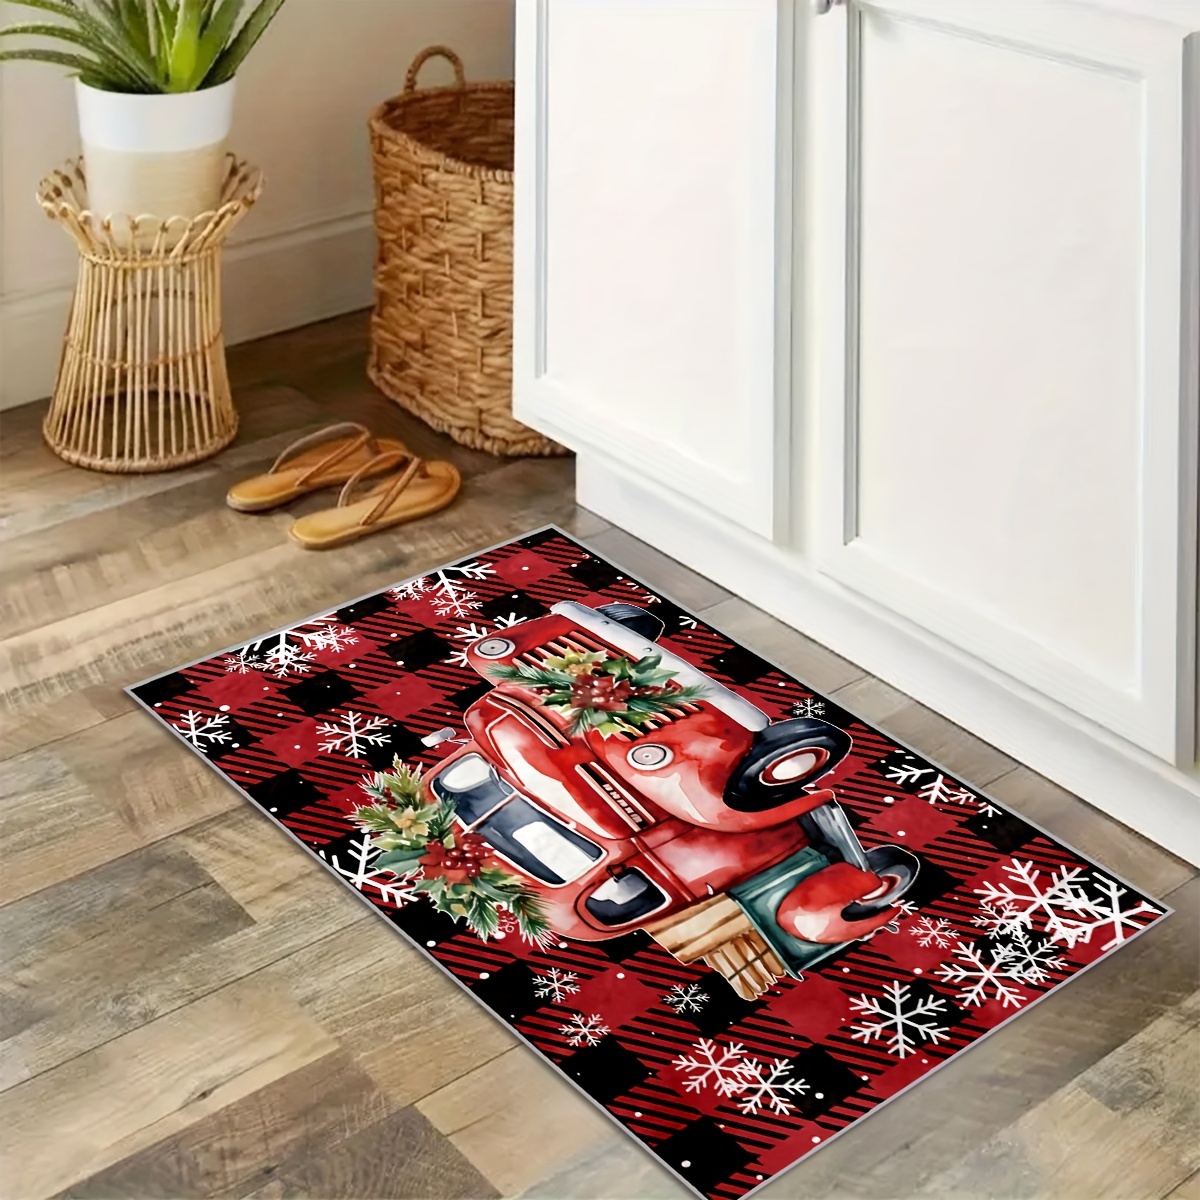  Kitchen Rugs and Mats Non Skid Washable, Absorbent